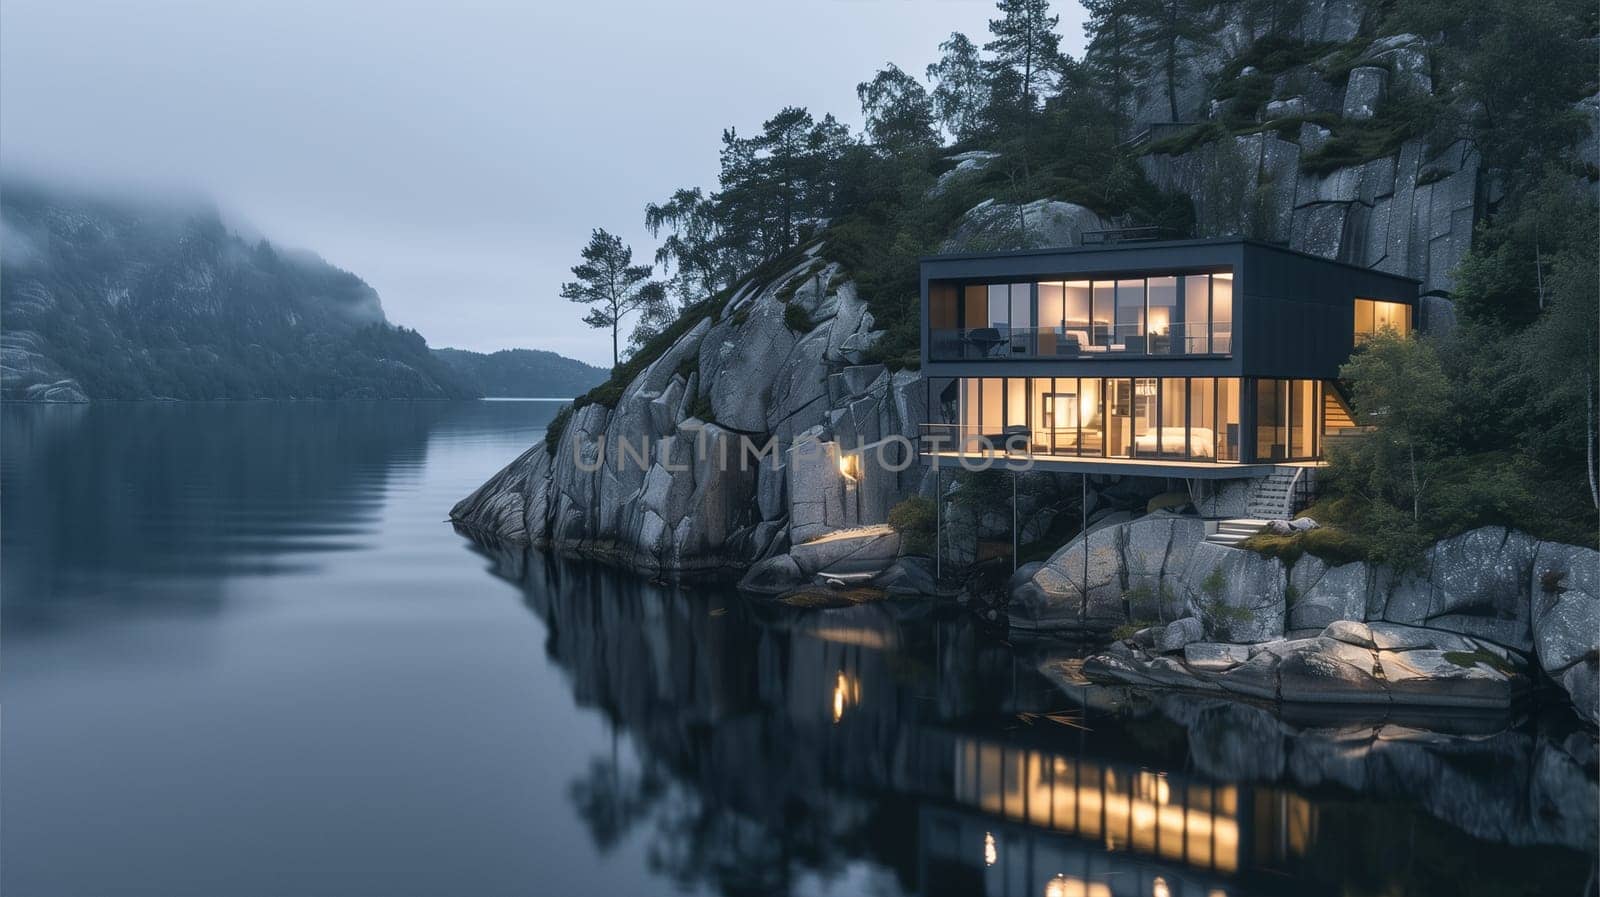 A house sits precariously on the edge of a cliff overlooking a body of water. The stunning view showcases the juxtaposition of man-made structure against the natural landscape.